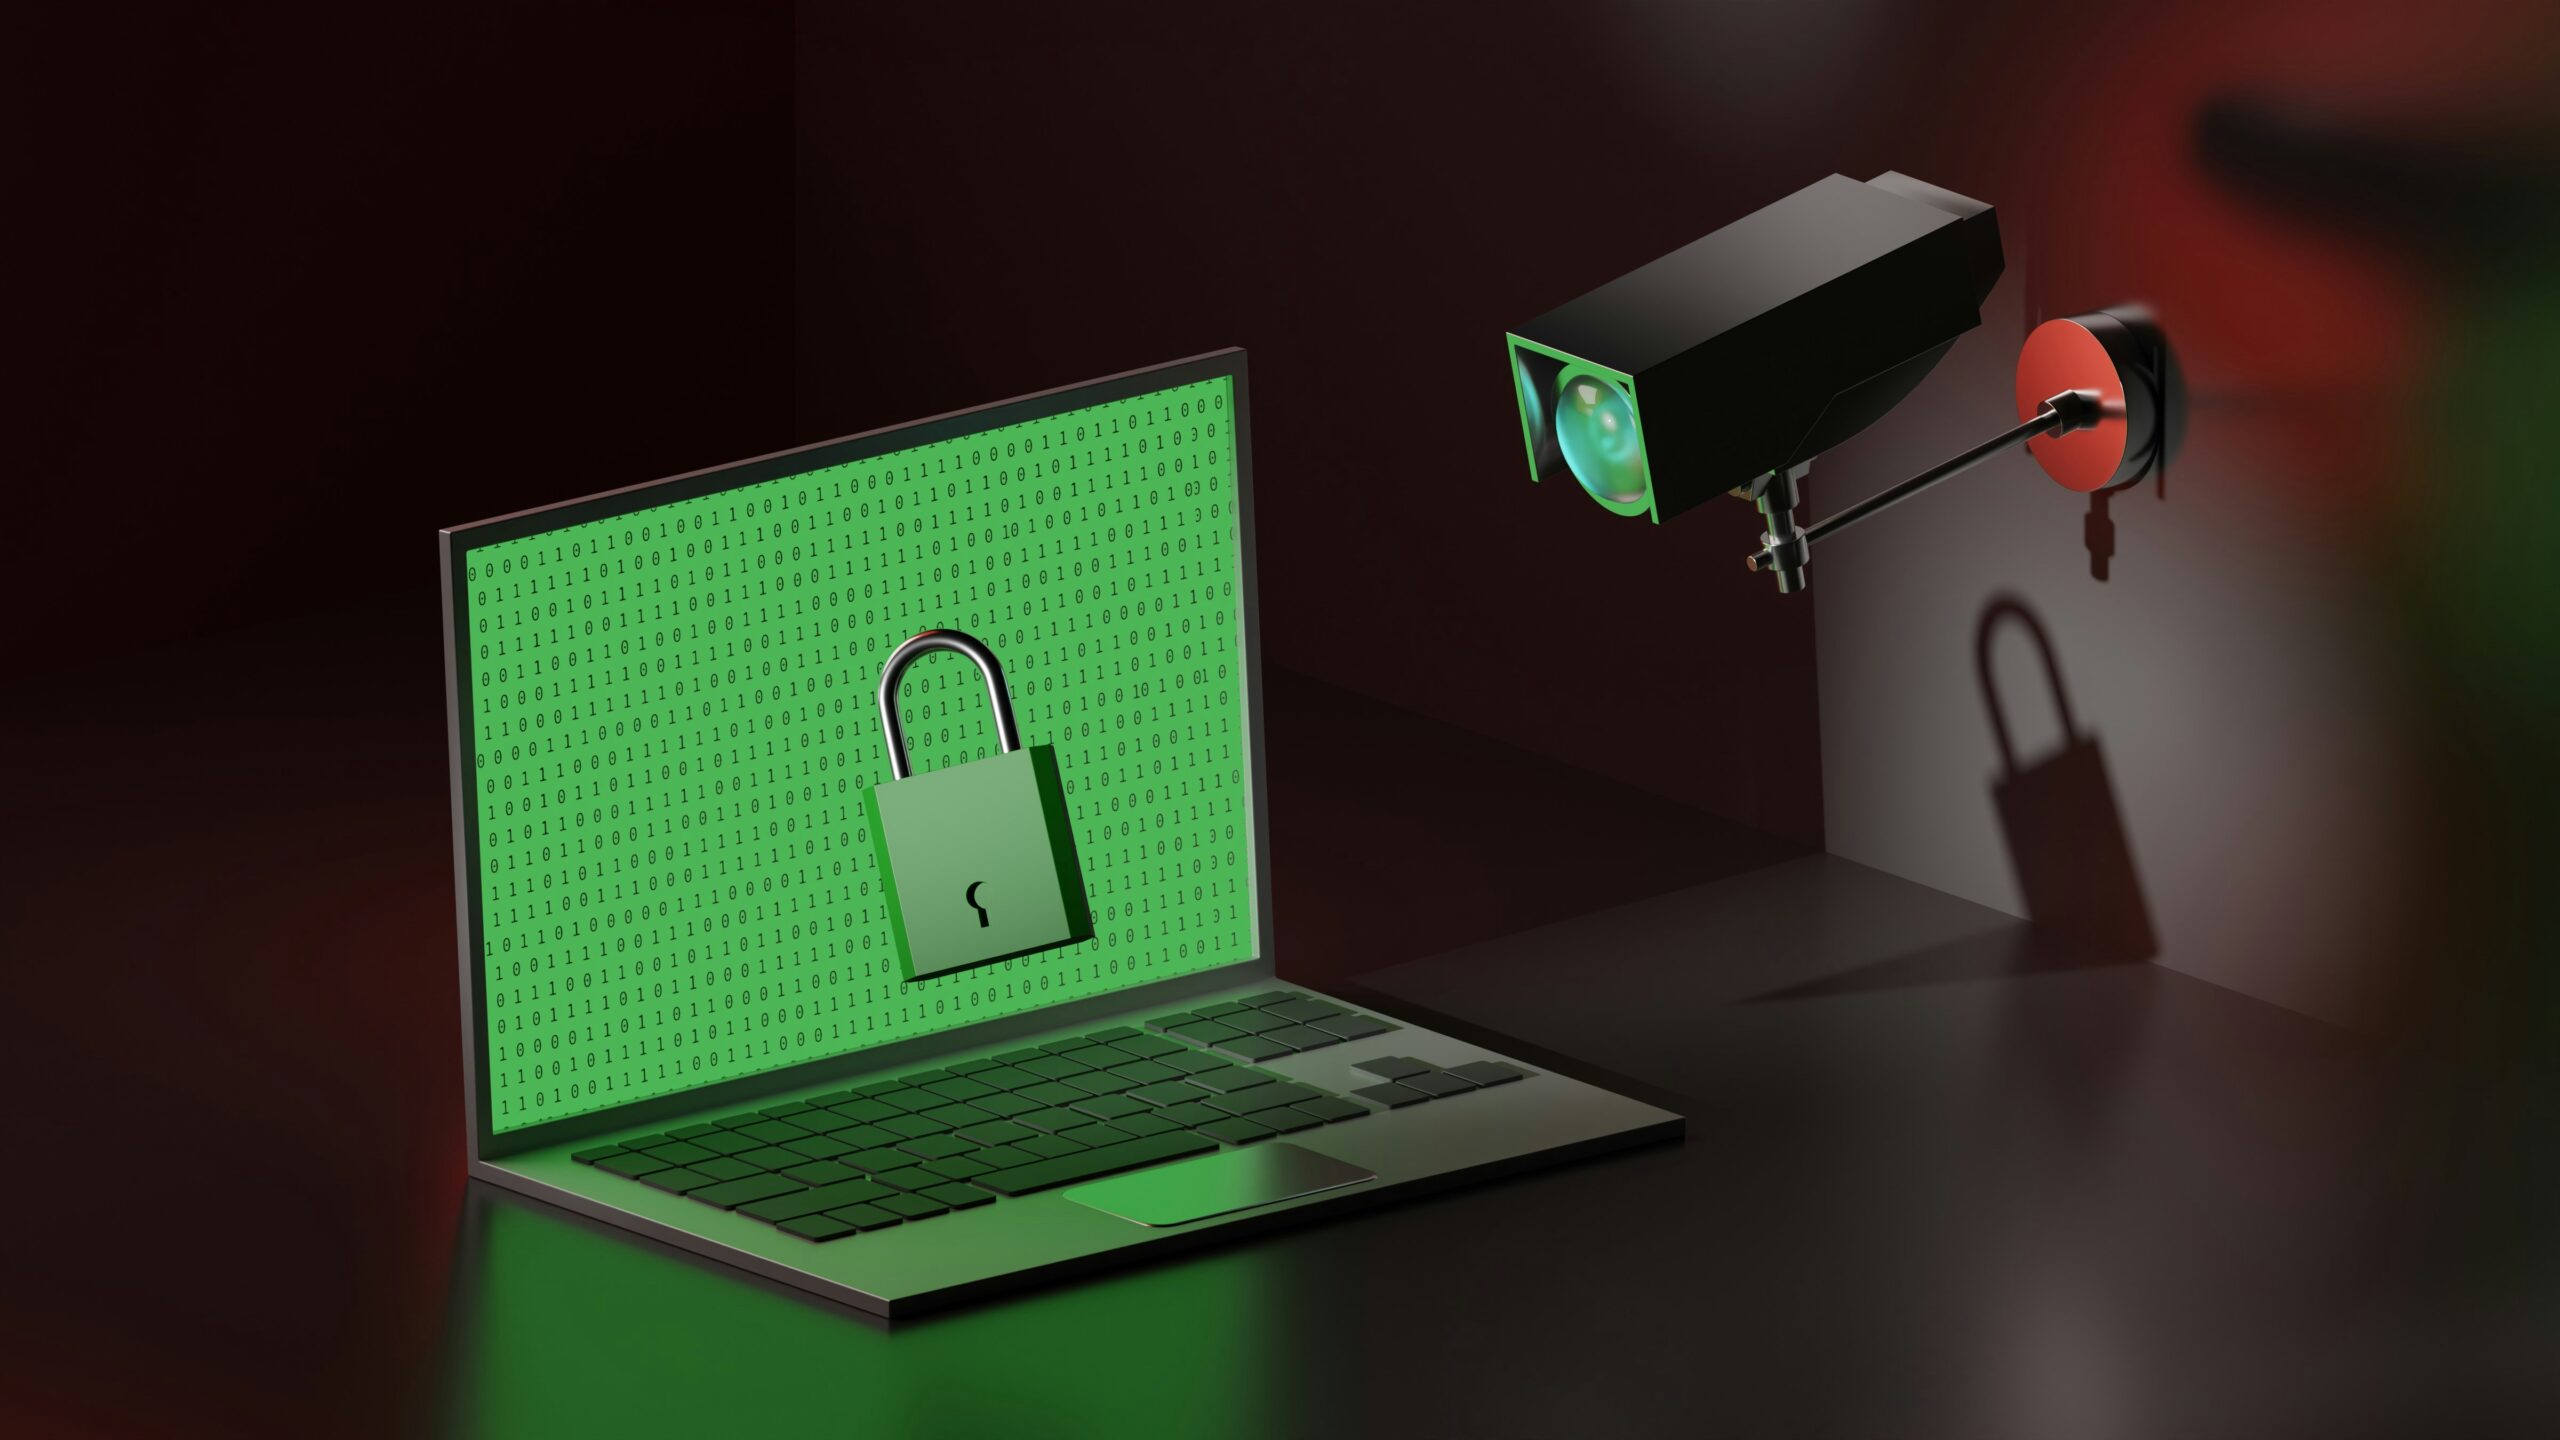 A laptop with a green padlock and a security camera, symbolizing cybersecurity measures to protect PII.